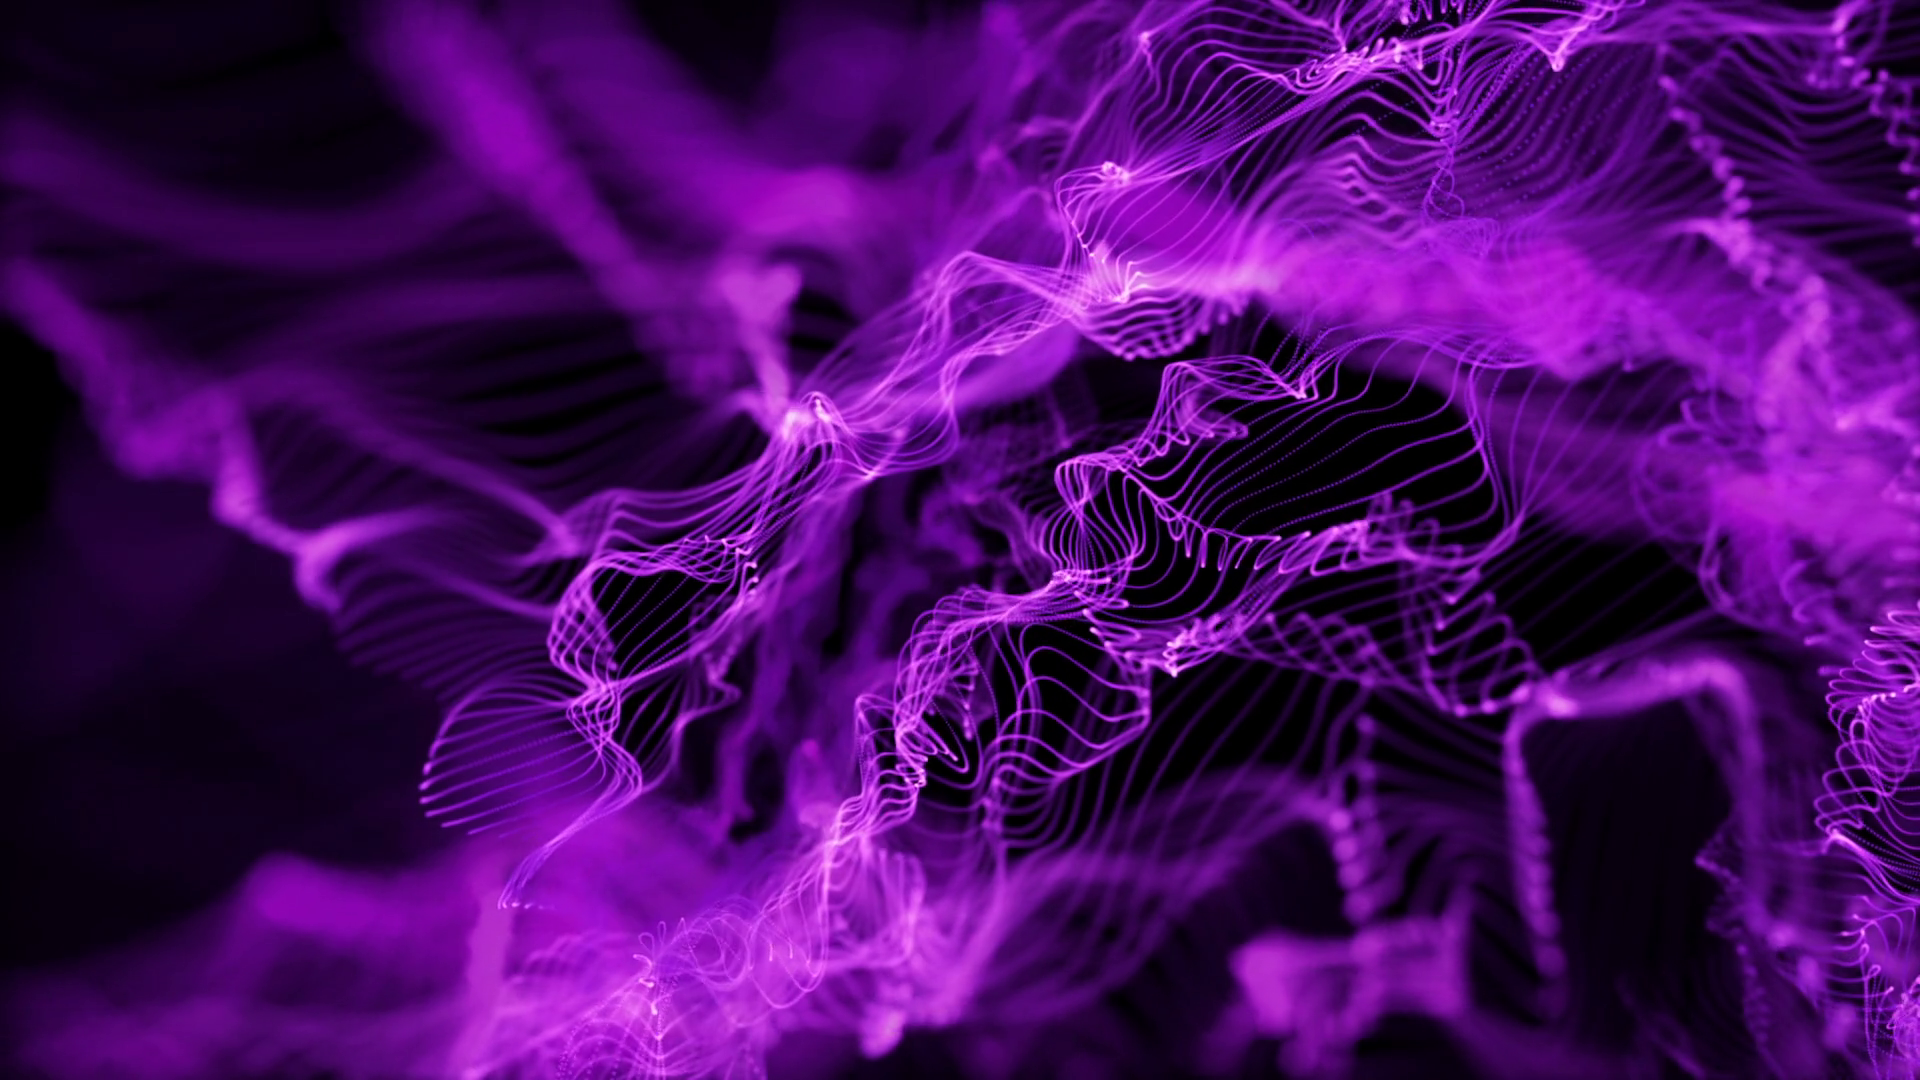 Energy Flower Made Up Of Glowing Particles. Seamless Loop. Violet Purple Indigo. Full HD Motion Background 00:10 SBV 312810127